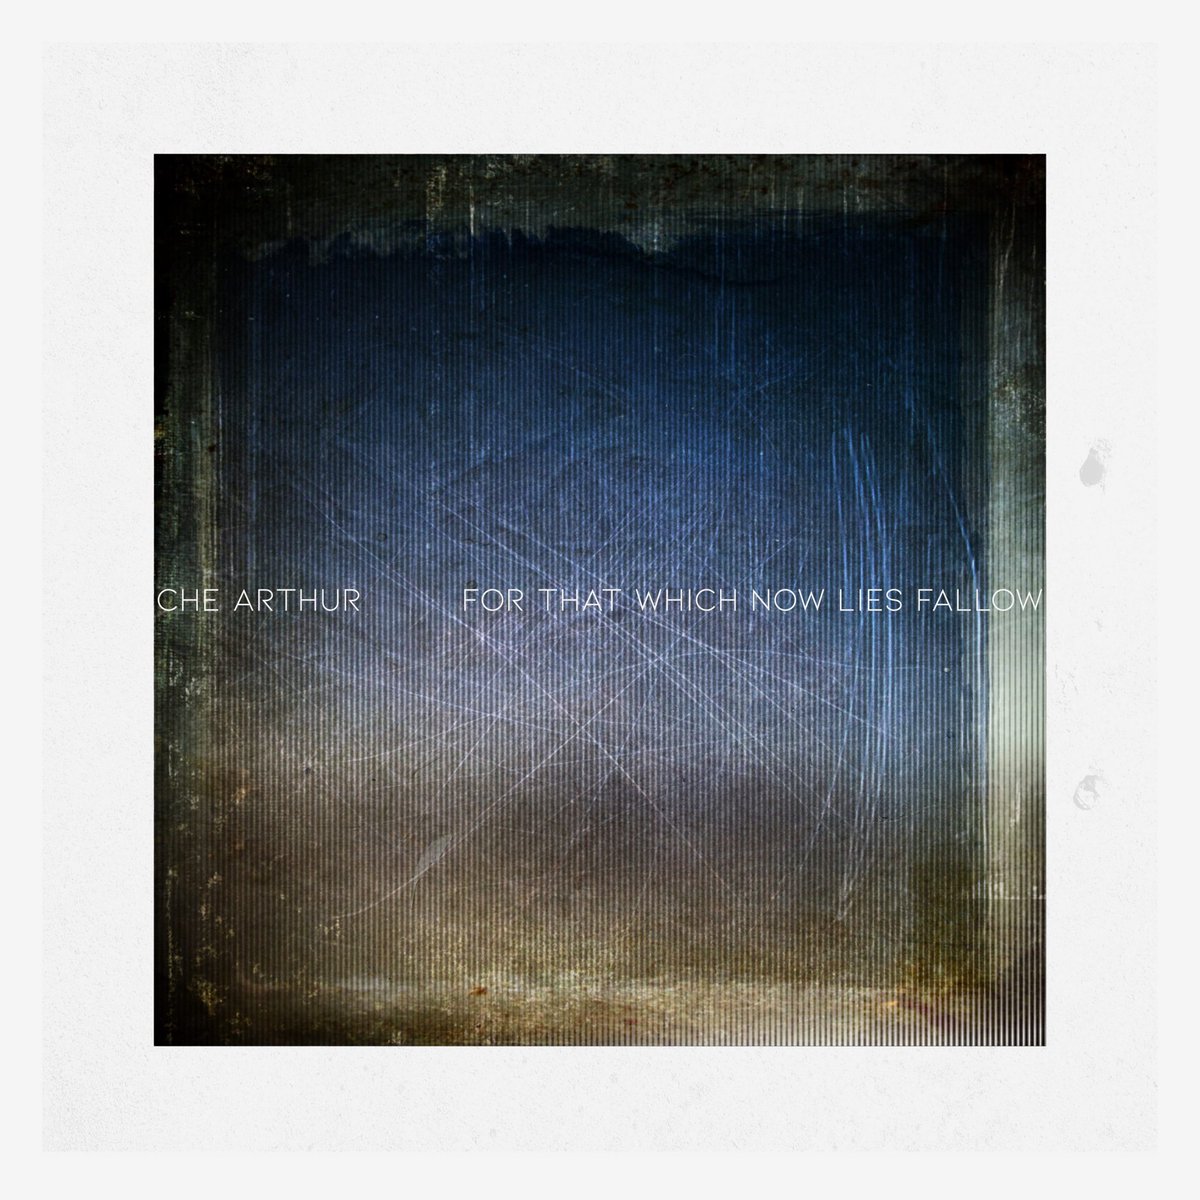 Listen to the album 'For That Which Now Lies Fallow' and discover Che Arthur's deep creativity. #indiedockmusicblog #hardrock indiedockmusicblog.co.uk/?p=23716